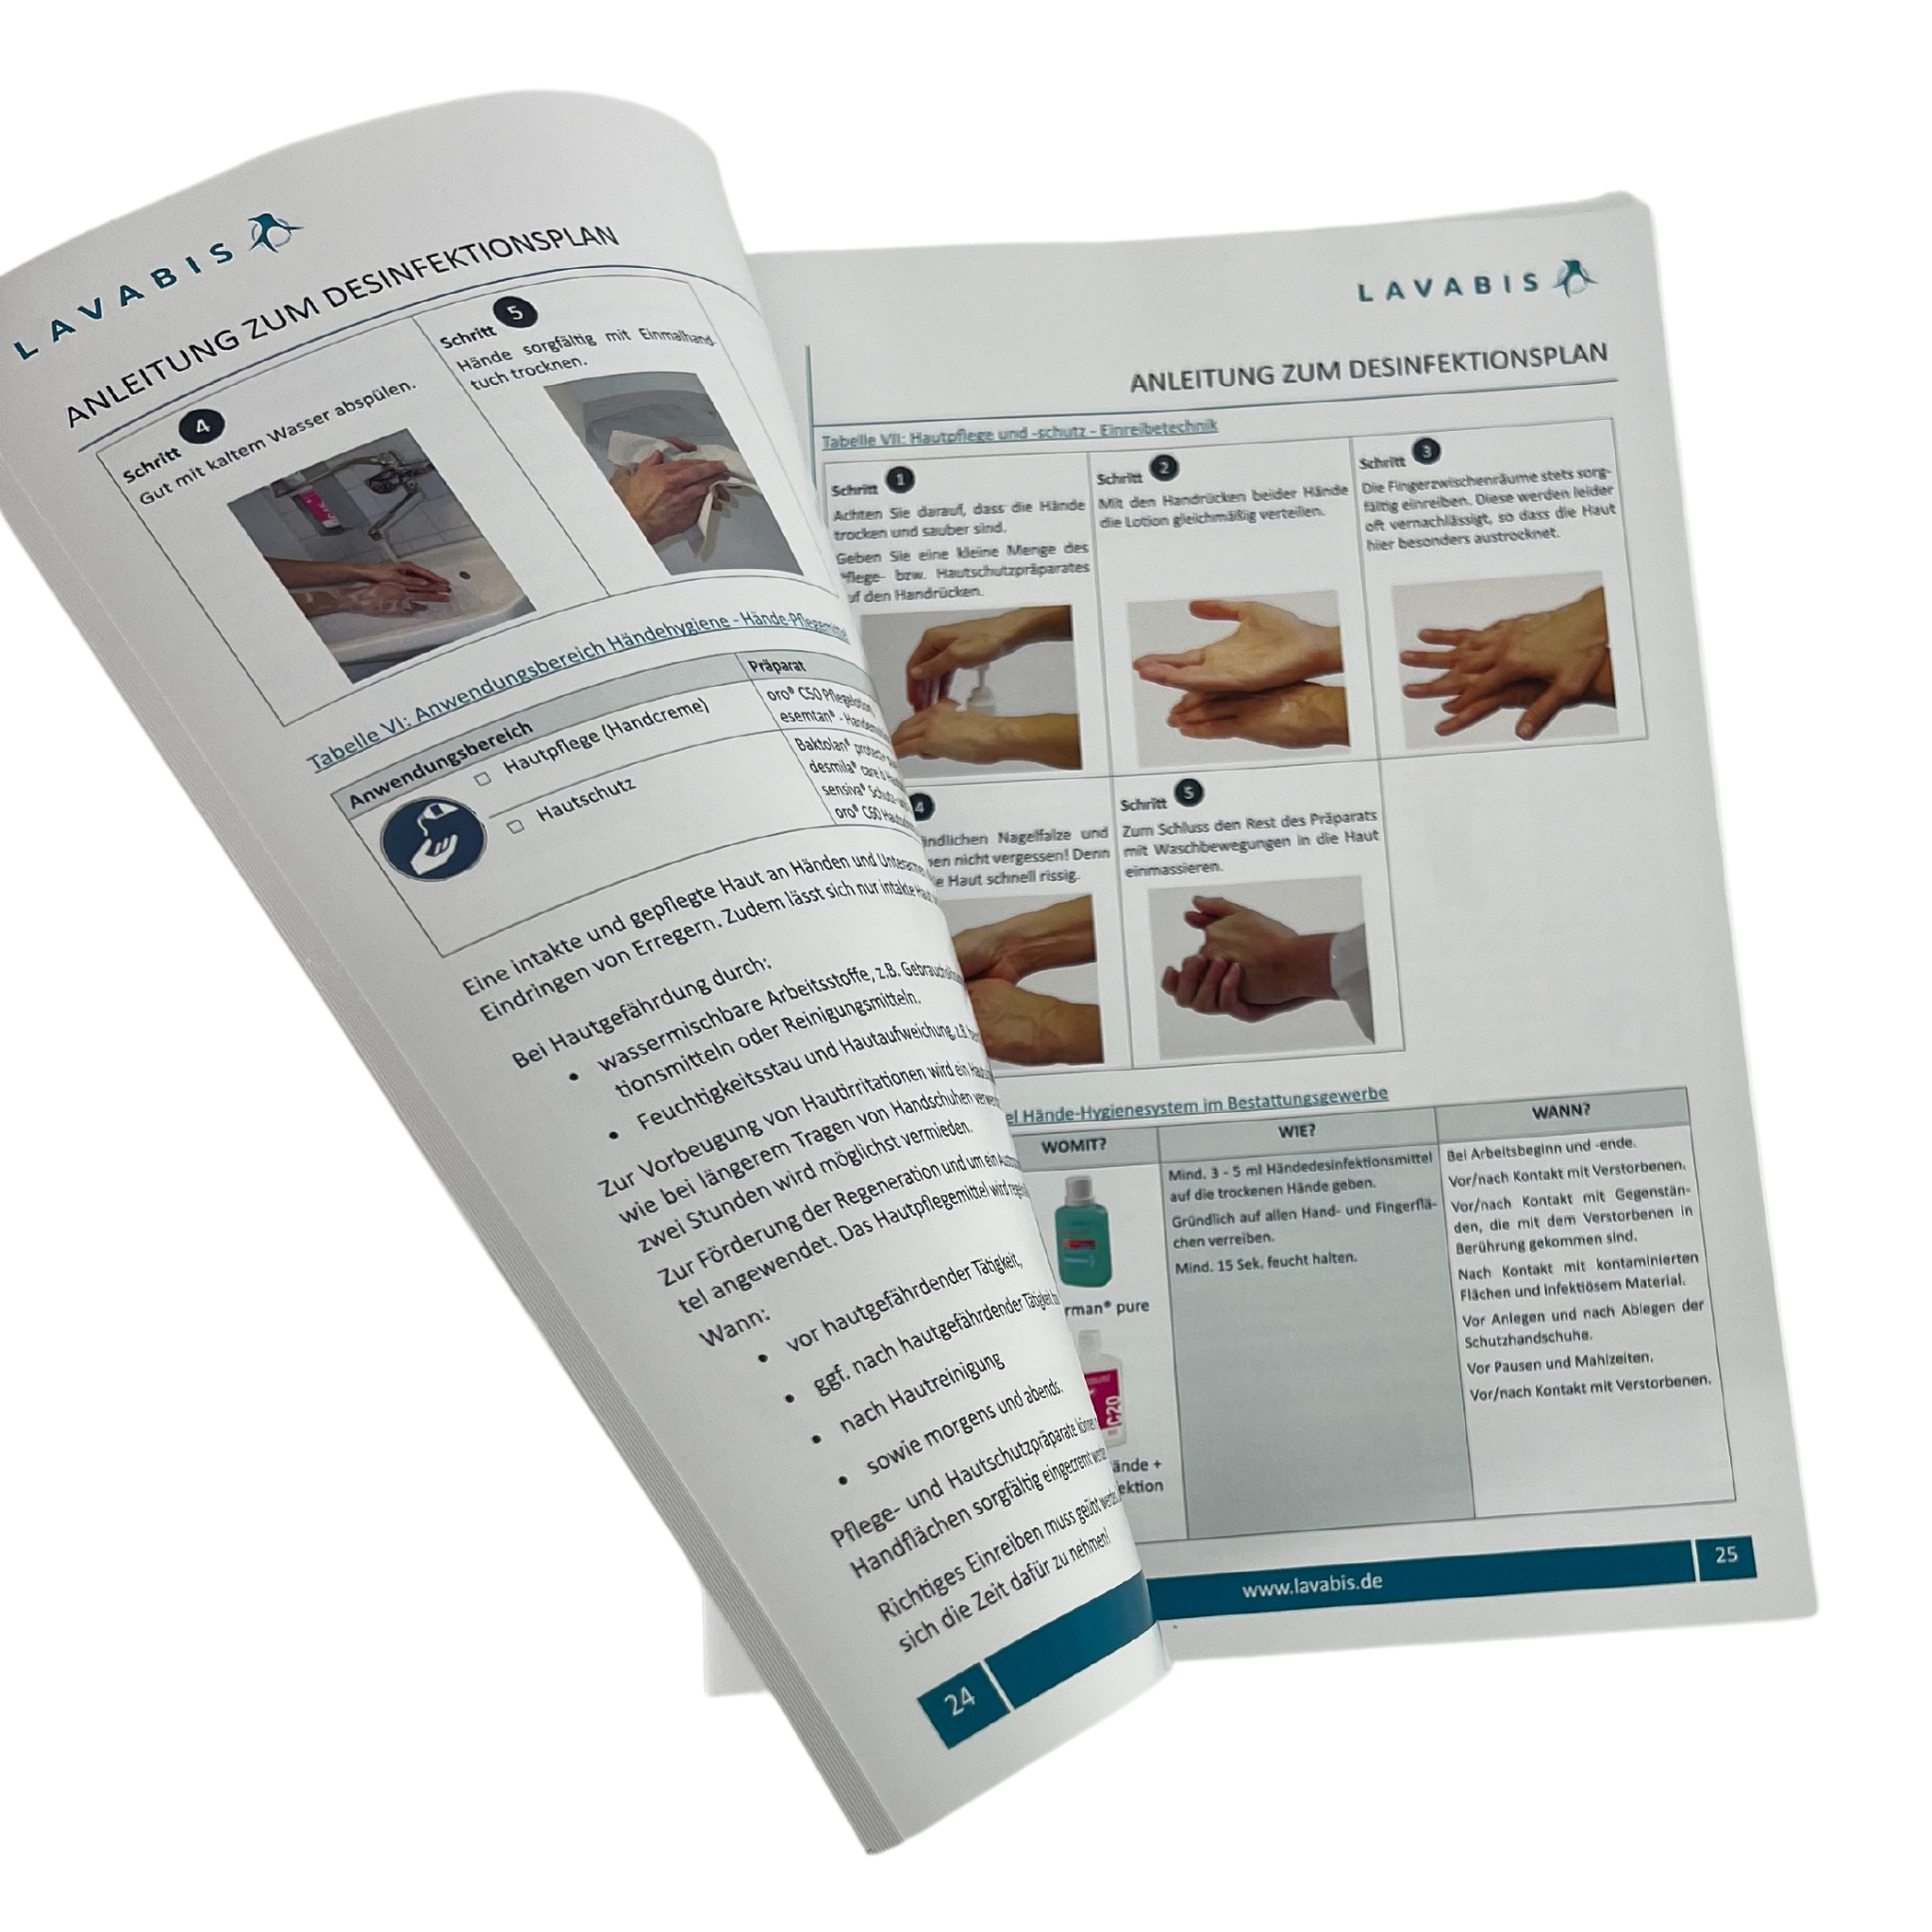 Disinfection plan for morticians - Optimum laminated - 0